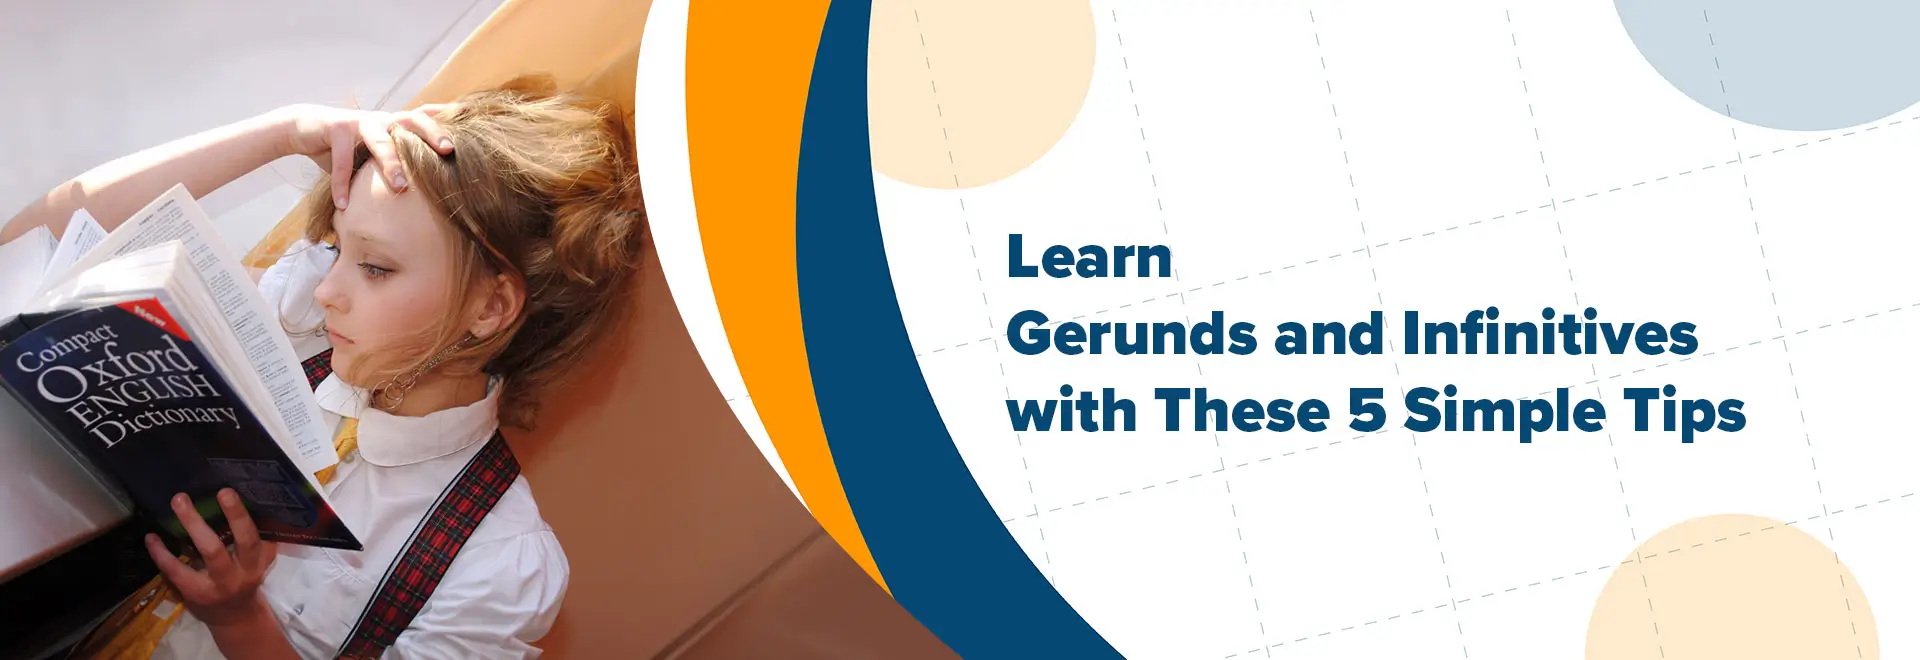 Learn Gerunds and Infinitives with These 5 Simple Tips